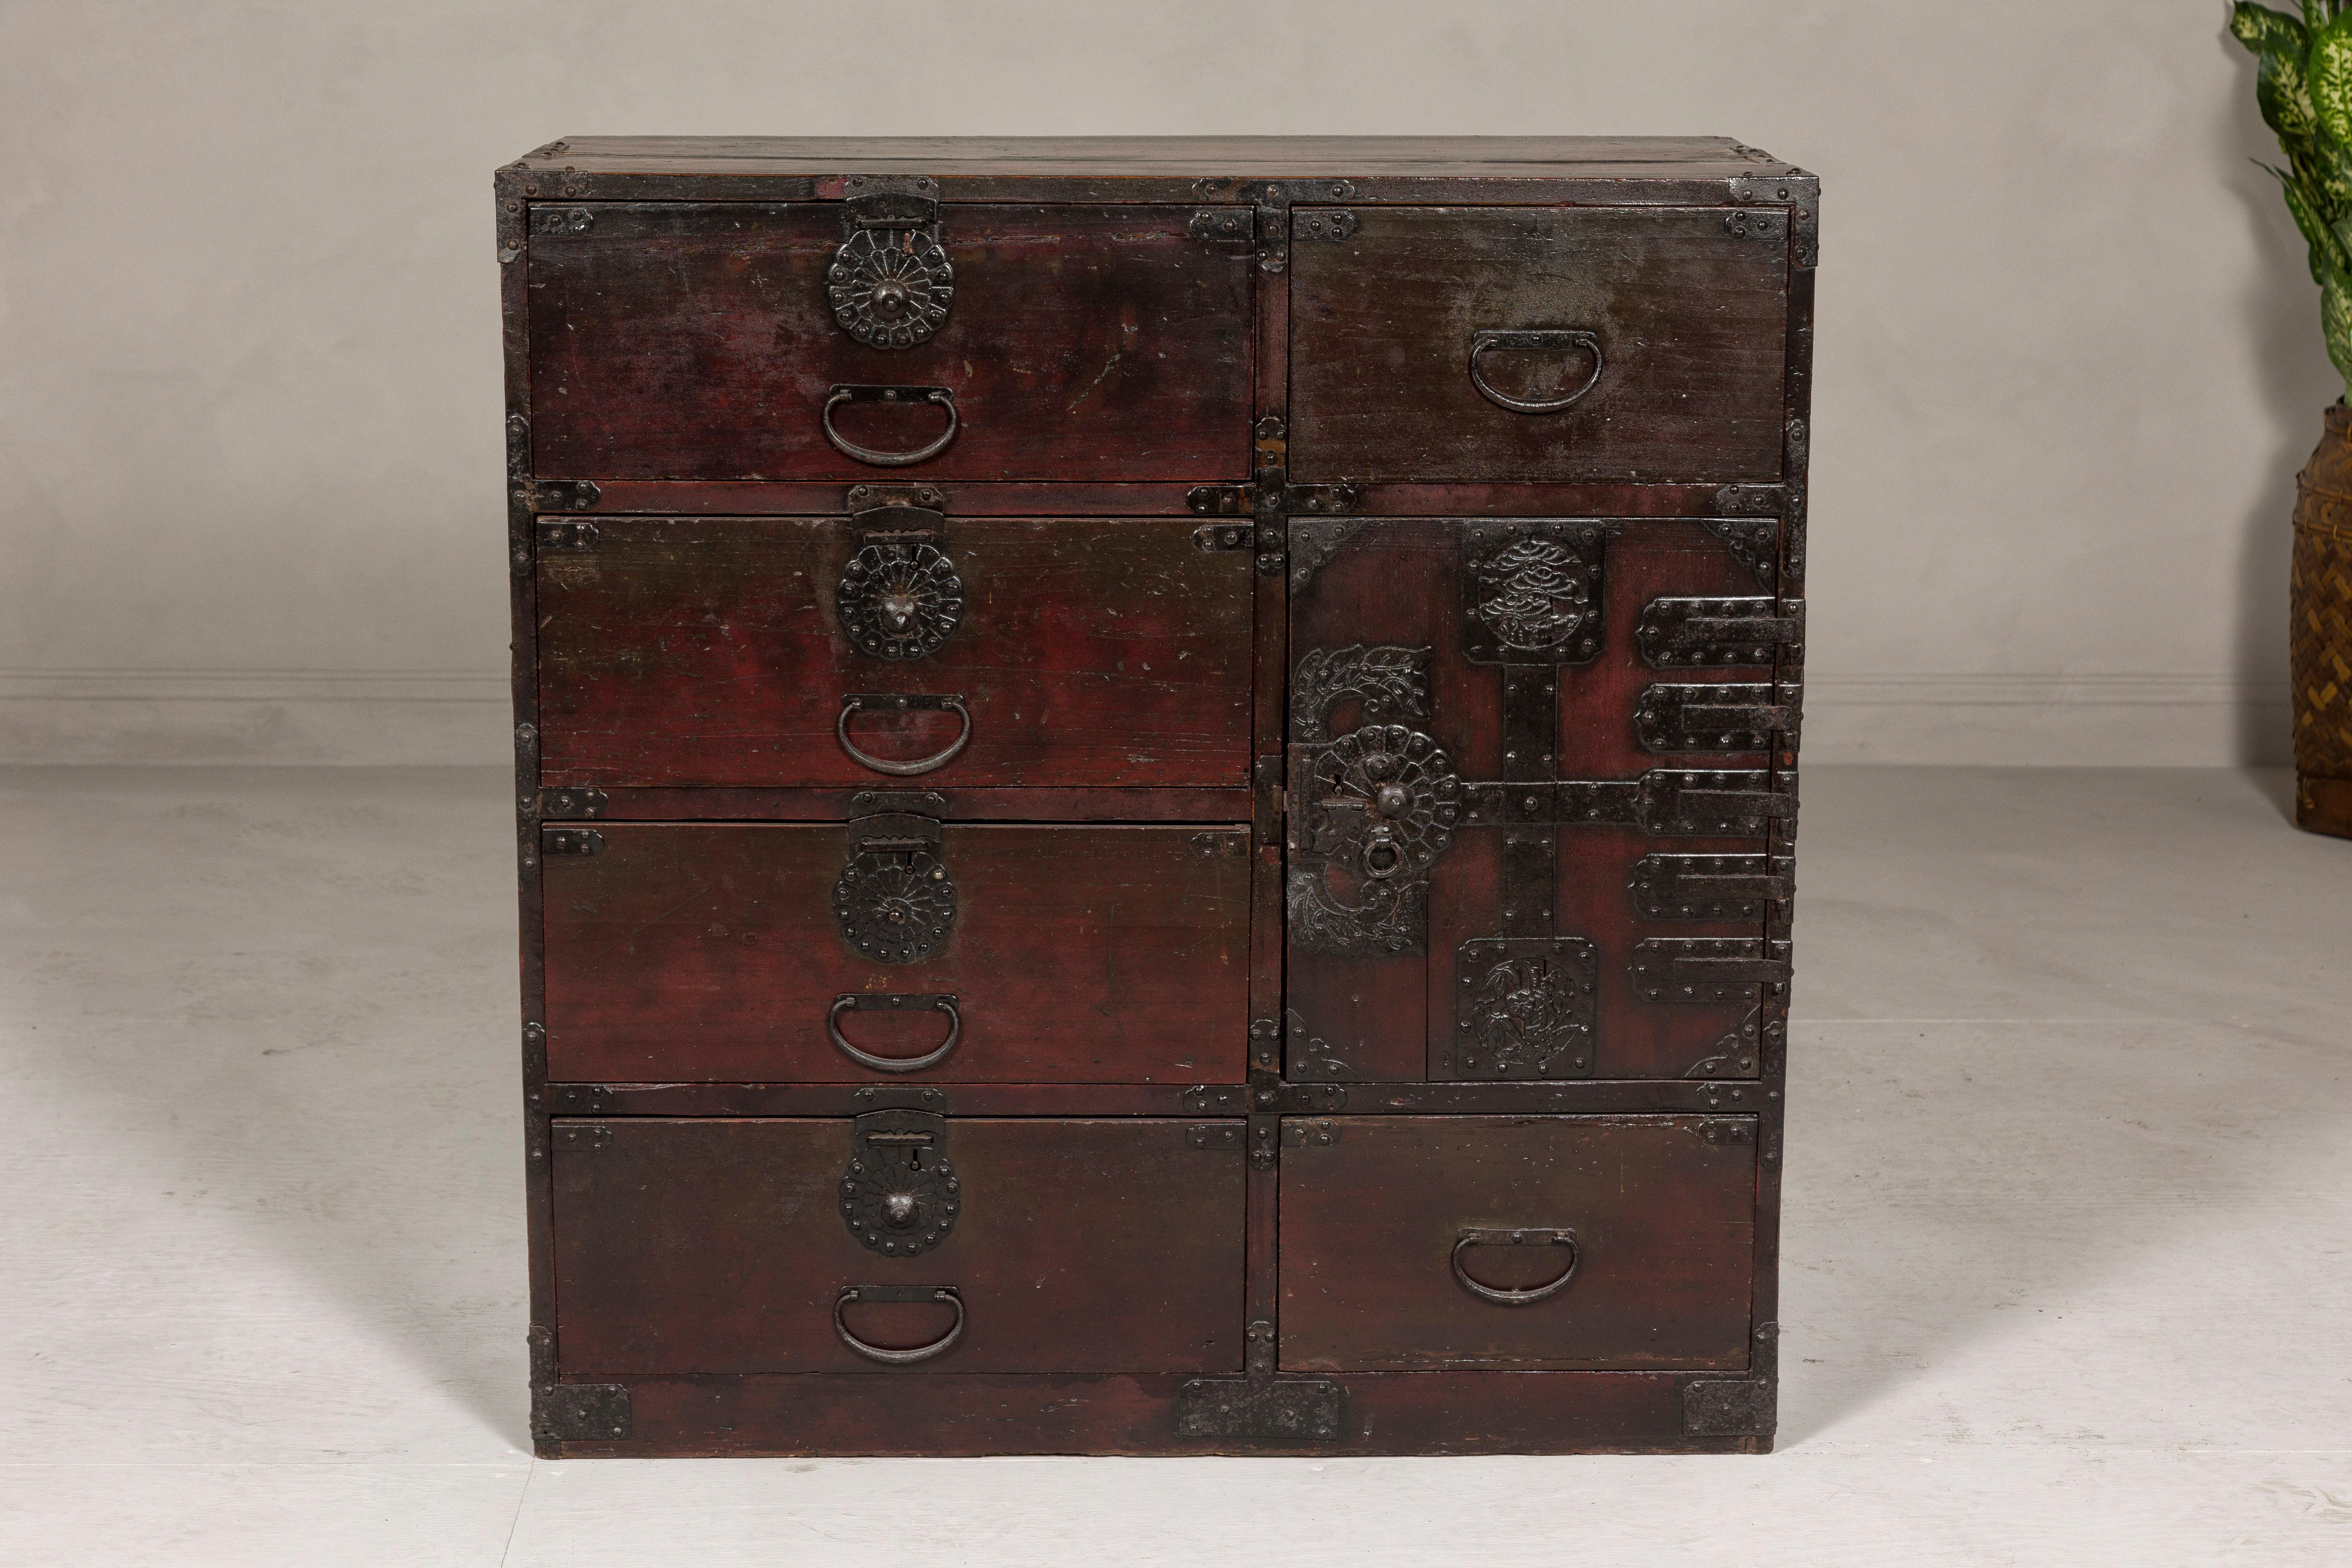 Japanese Meiji Period 19th Century Sendai Type Tansu Chest with Drawers and Safe For Sale 6